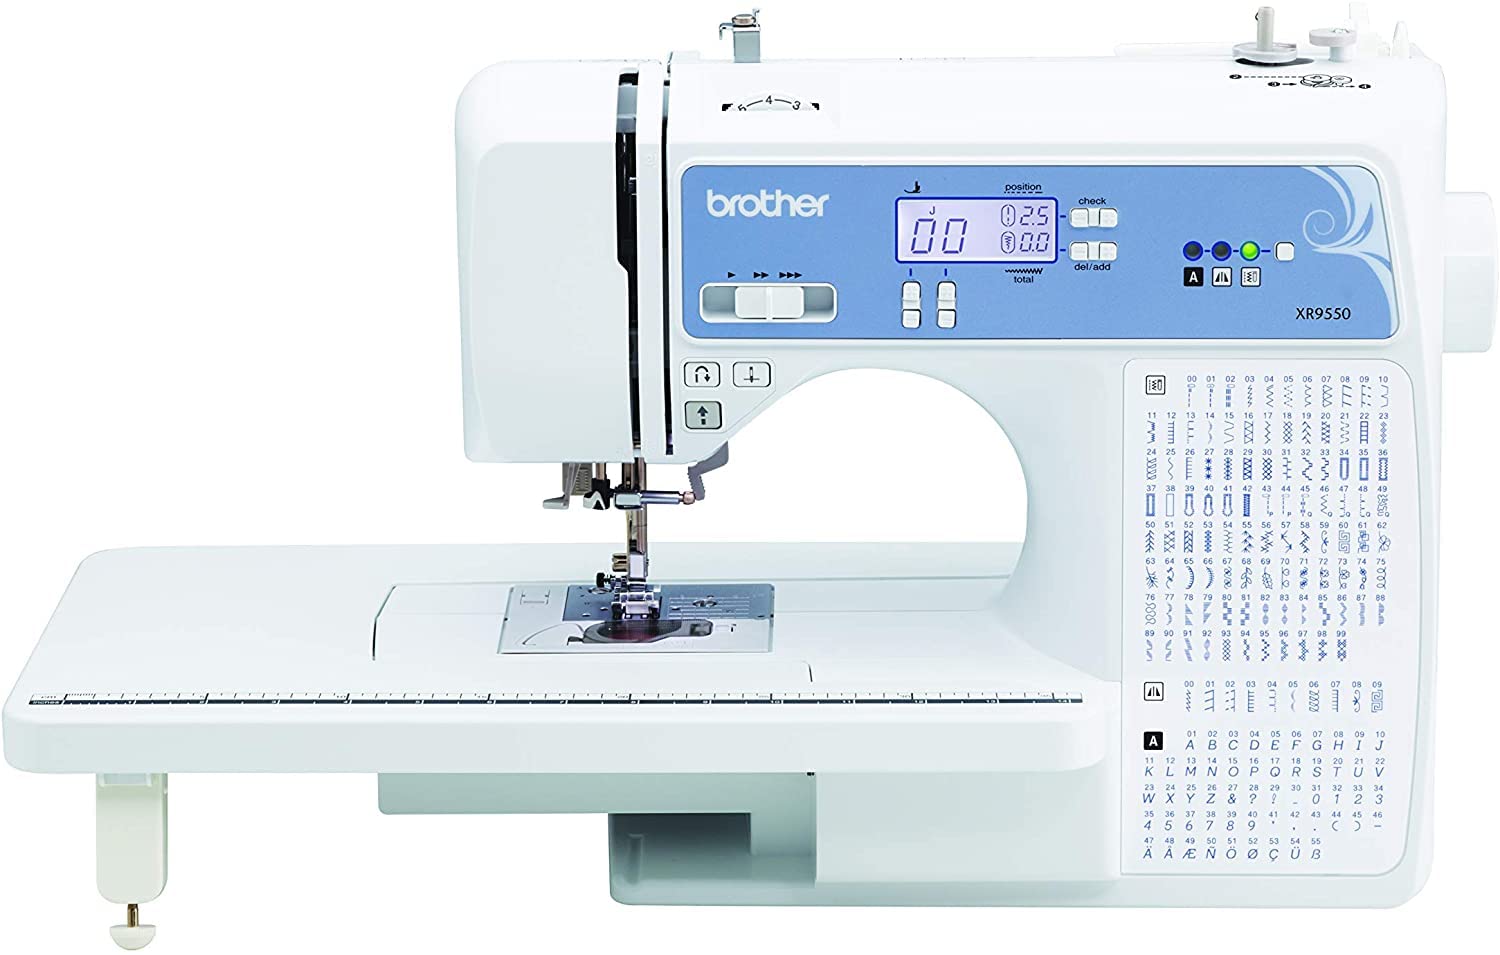 Brother XR9550 Sewing and Quilting Machine, Computerized, 165 Built-in Stitches, LCD Display, Wide Table, 8 Included Presser Feet - White